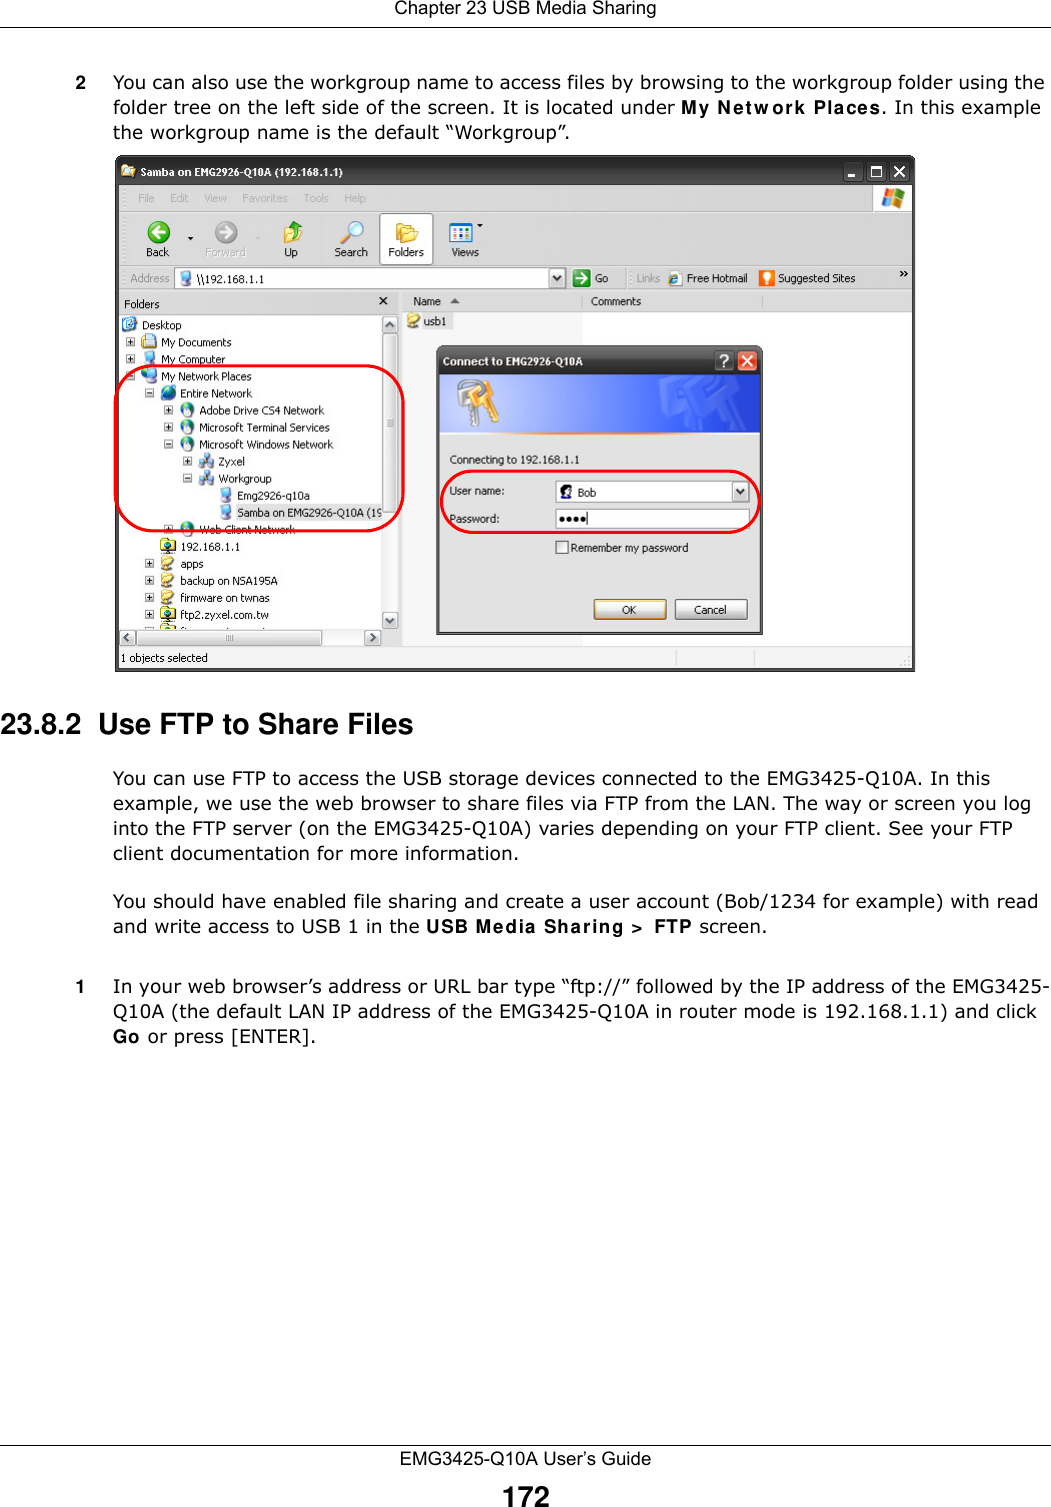 Chapter 23 USB Media SharingEMG3425-Q10A User’s Guide1722You can also use the workgroup name to access files by browsing to the workgroup folder using the folder tree on the left side of the screen. It is located under My N et w or k Places. In this example the workgroup name is the default “Workgroup”. 23.8.2  Use FTP to Share FilesYou can use FTP to access the USB storage devices connected to the EMG3425-Q10A. In this example, we use the web browser to share files via FTP from the LAN. The way or screen you log into the FTP server (on the EMG3425-Q10A) varies depending on your FTP client. See your FTP client documentation for more information. You should have enabled file sharing and create a user account (Bob/1234 for example) with read and write access to USB 1 in the USB M edia Sha r ing &gt;  FTP screen.1In your web browser’s address or URL bar type “ftp://” followed by the IP address of the EMG3425-Q10A (the default LAN IP address of the EMG3425-Q10A in router mode is 192.168.1.1) and click Go or press [ENTER].